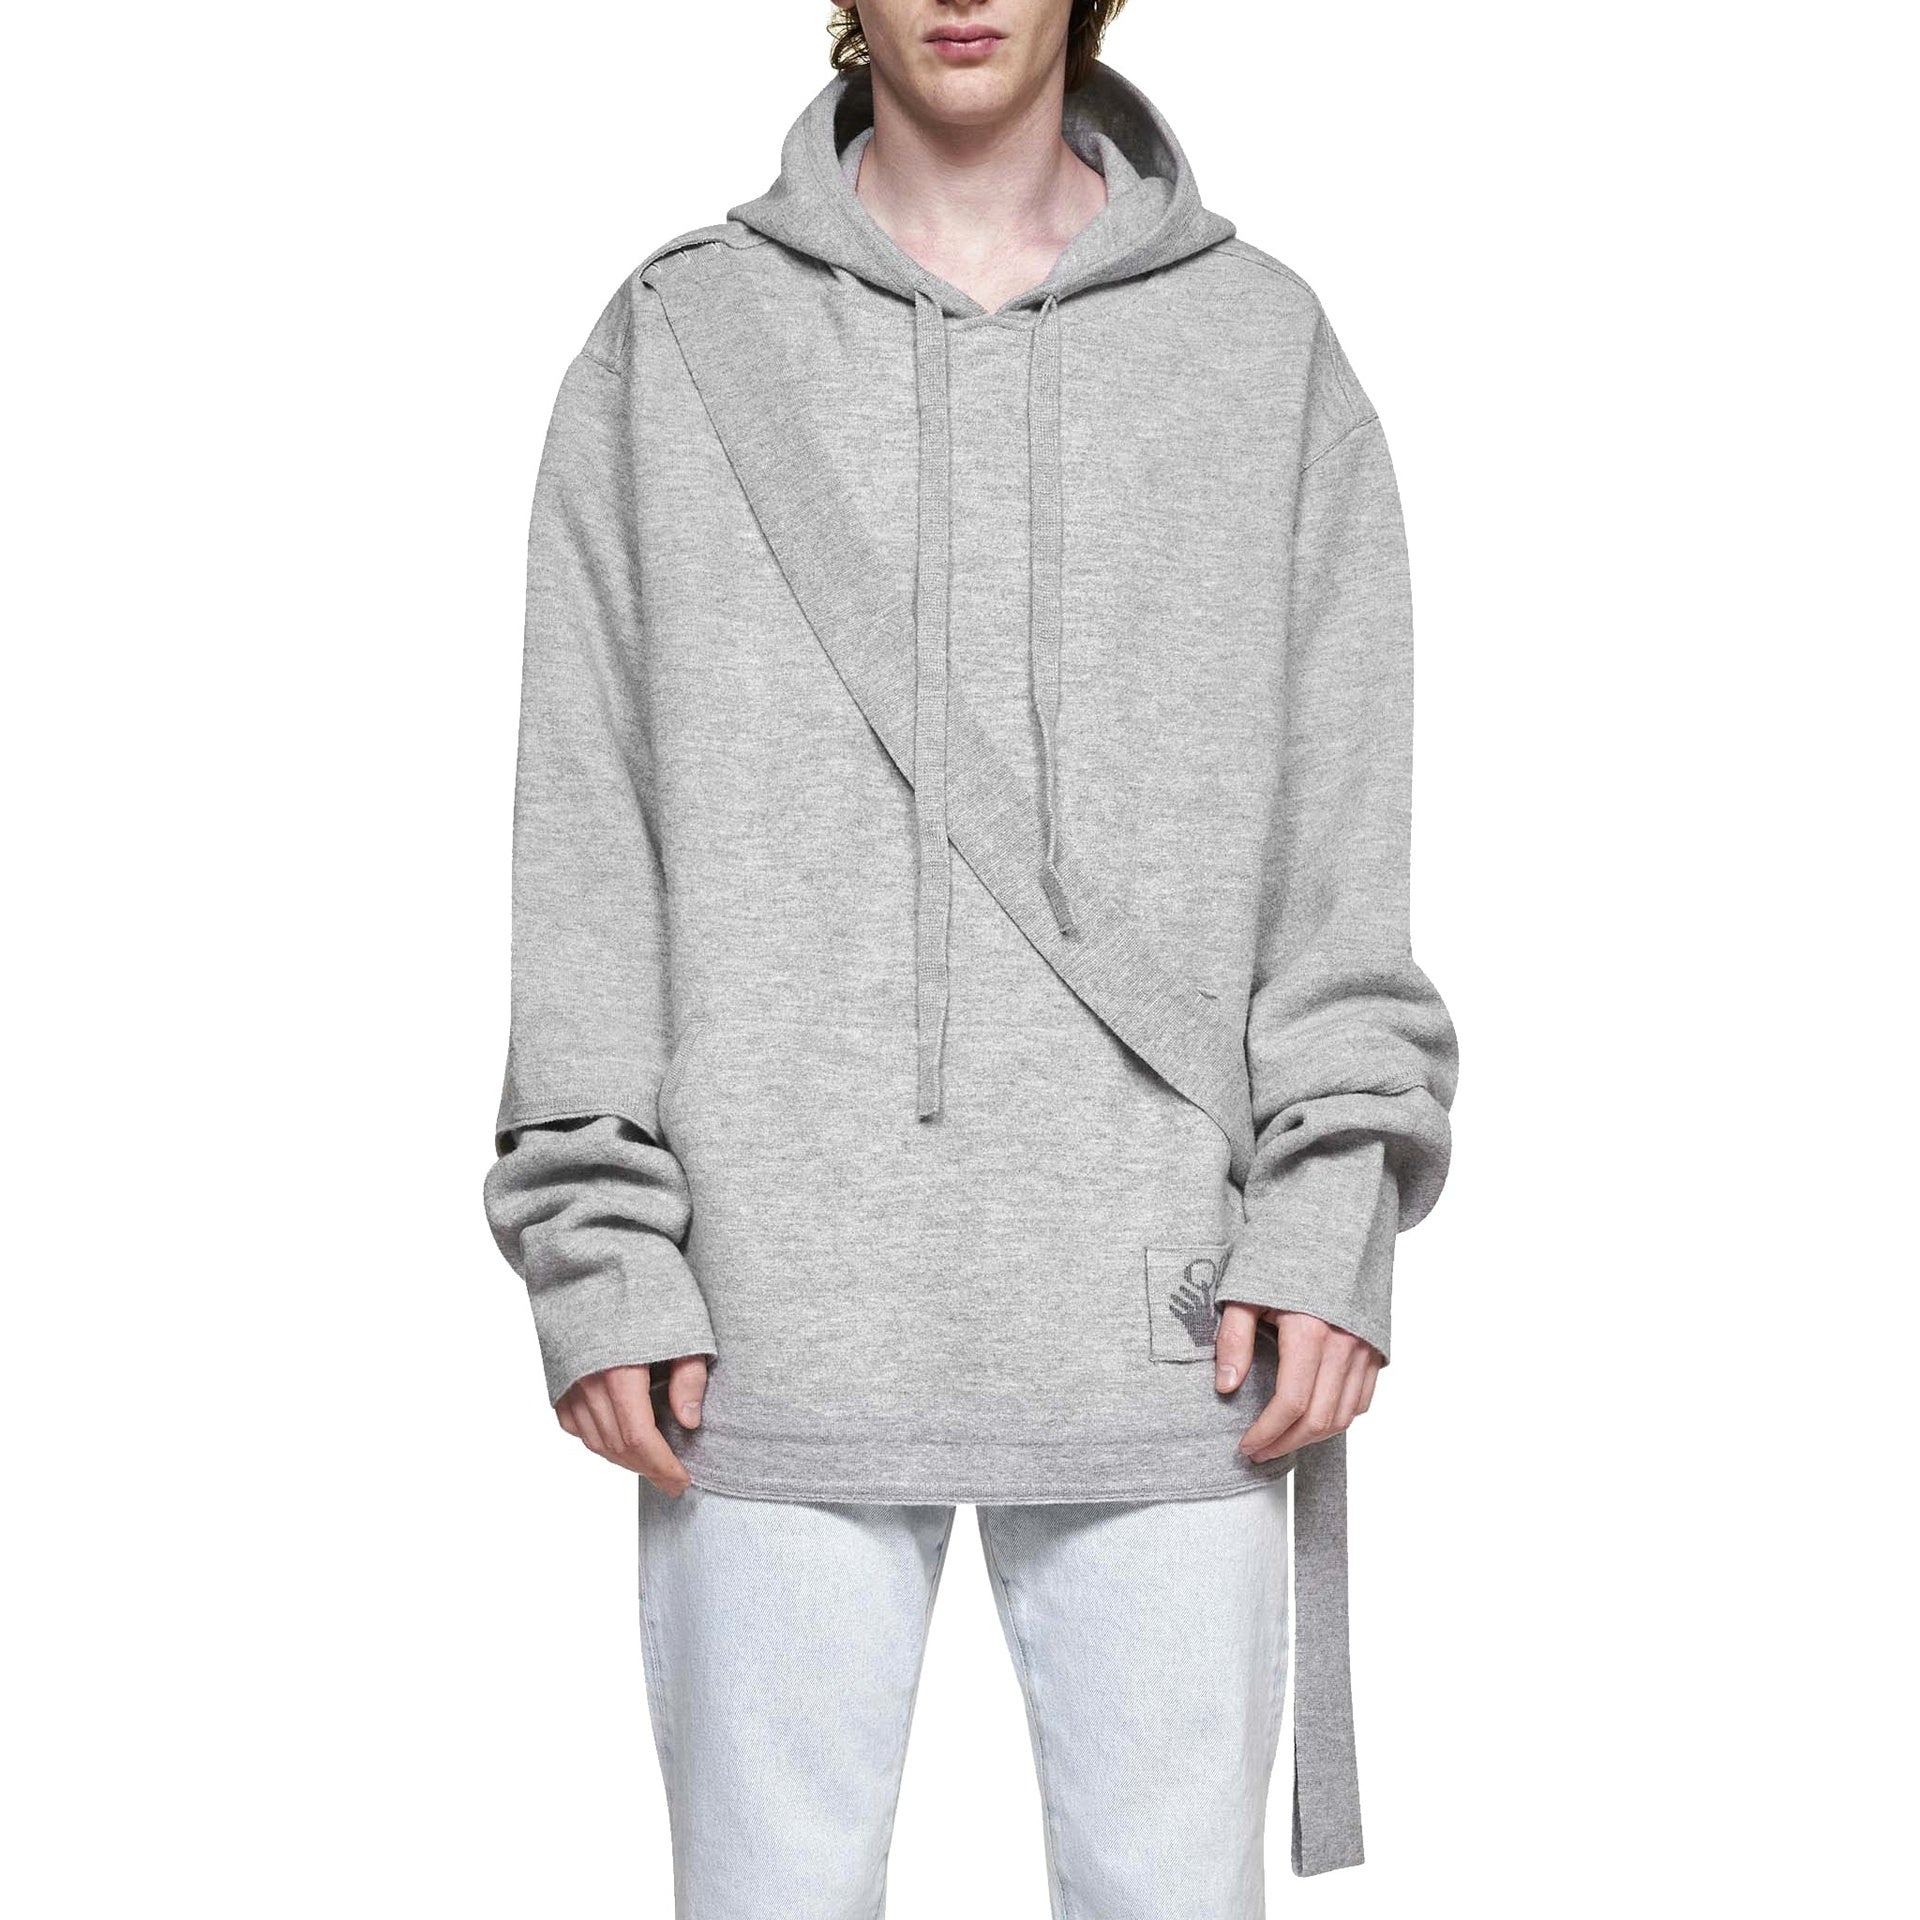 OFF-WHITE-OUTLET-SALE-Off-White-Wool-Sweatshirt-Strick-ARCHIVE-COLLECTION-2.jpg